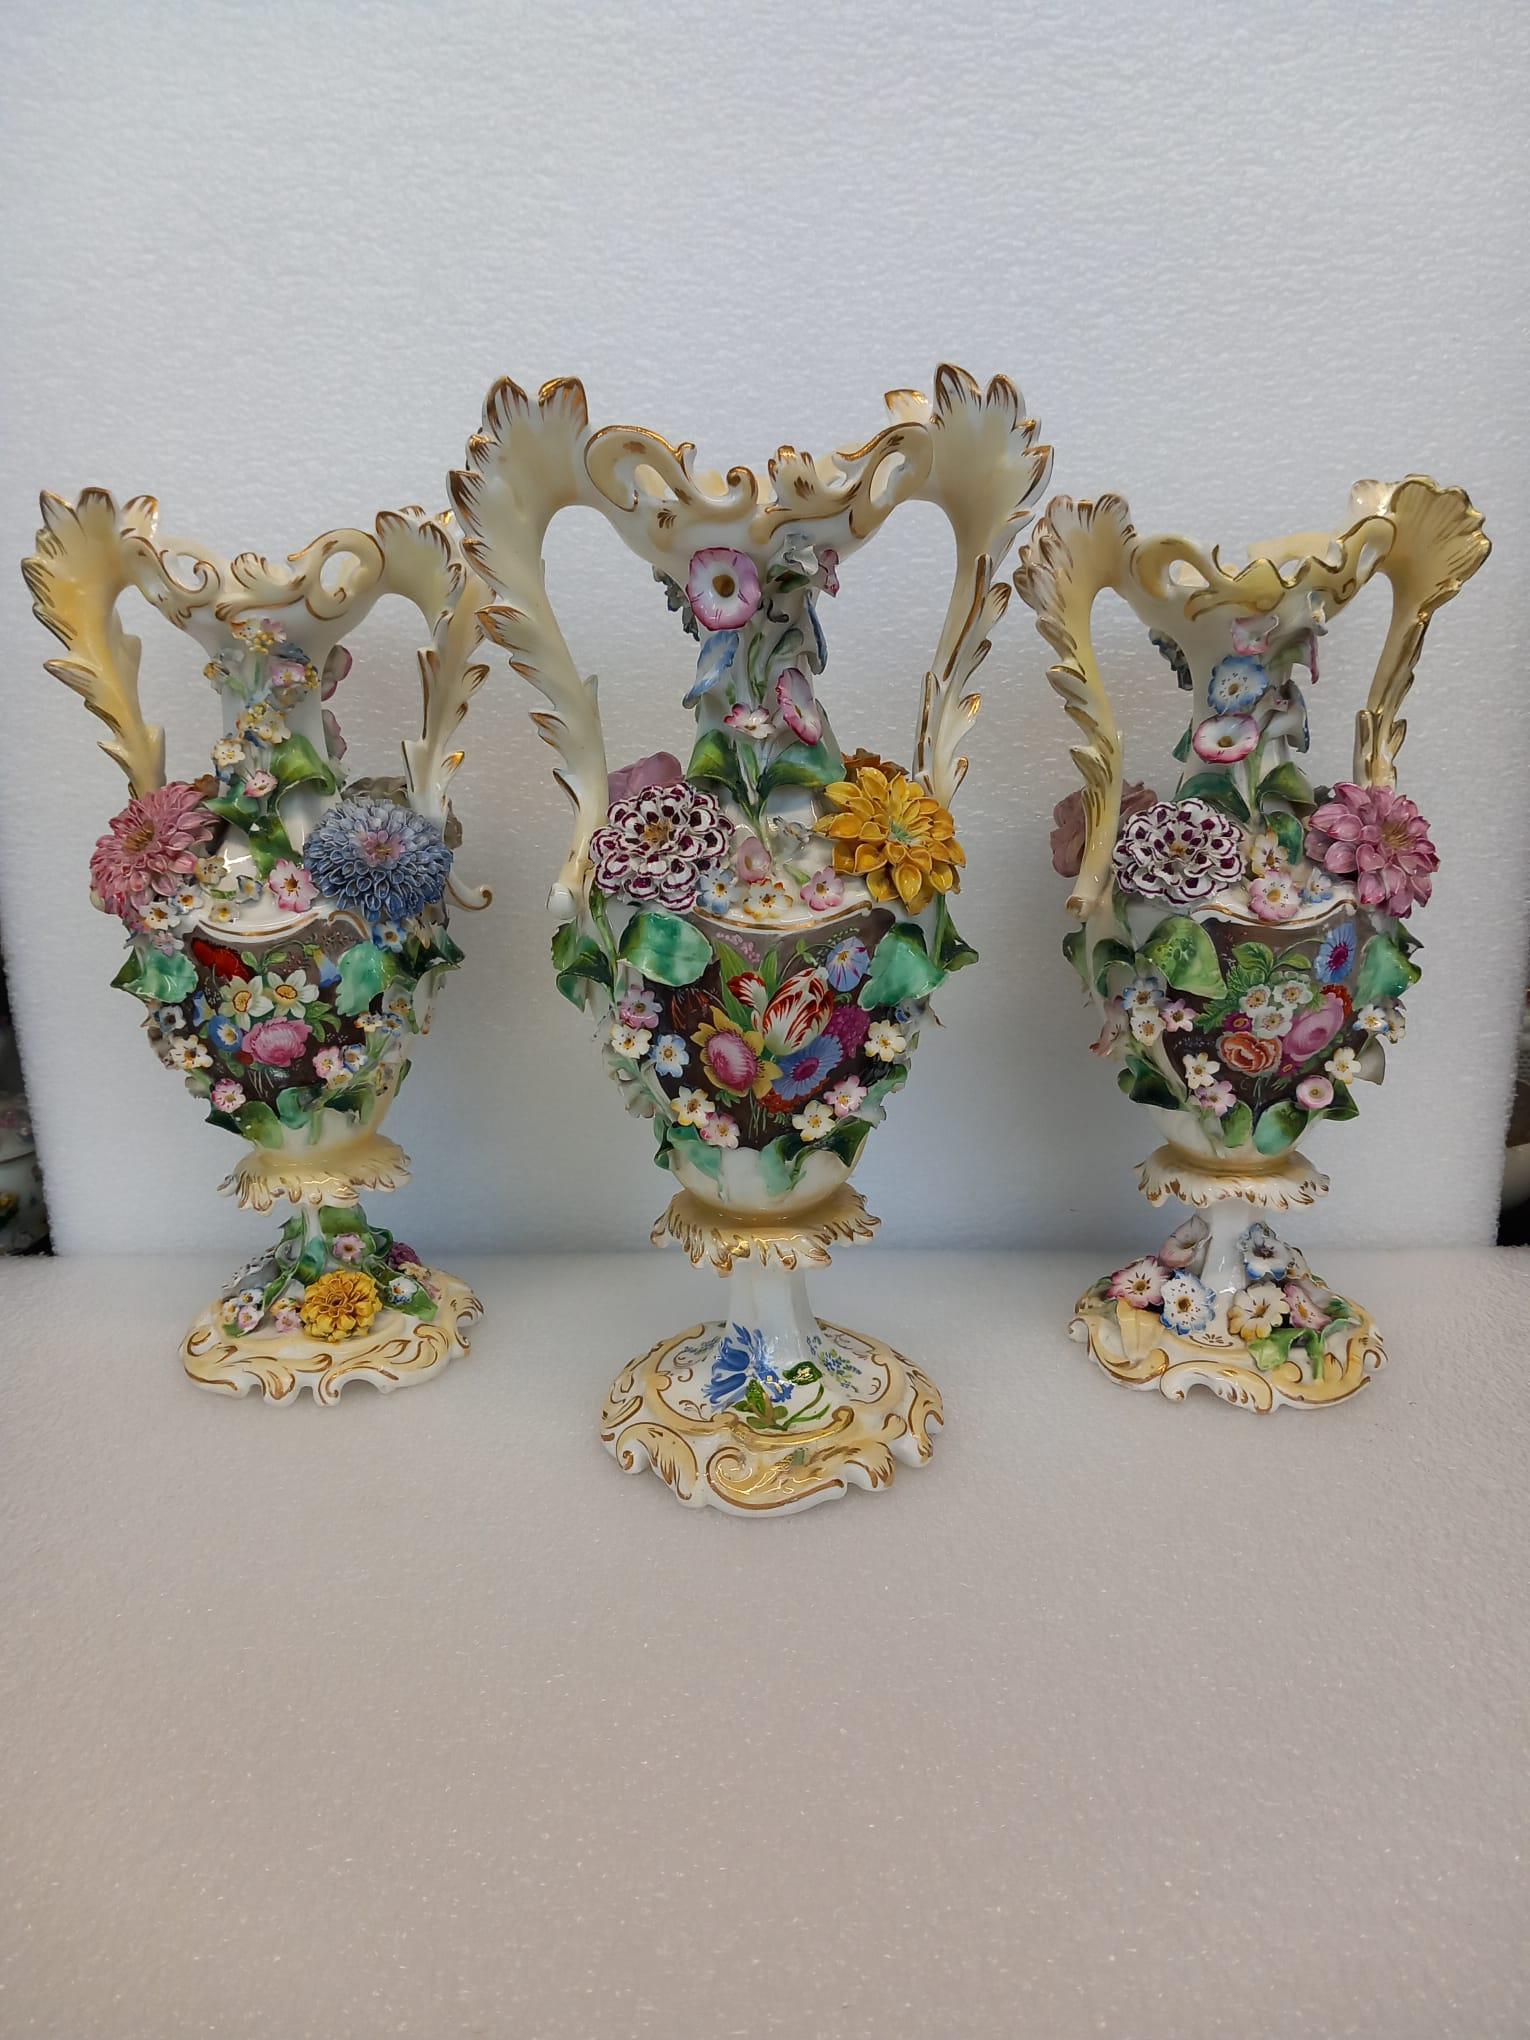 A garniture of three antique English porcelain vases, heavily decorated with hand made porcelain flowers and hand painted with wonderful flower cartouches in the Dutch style.
The porcelain is most likely to have been manufactured by John Ridgway as